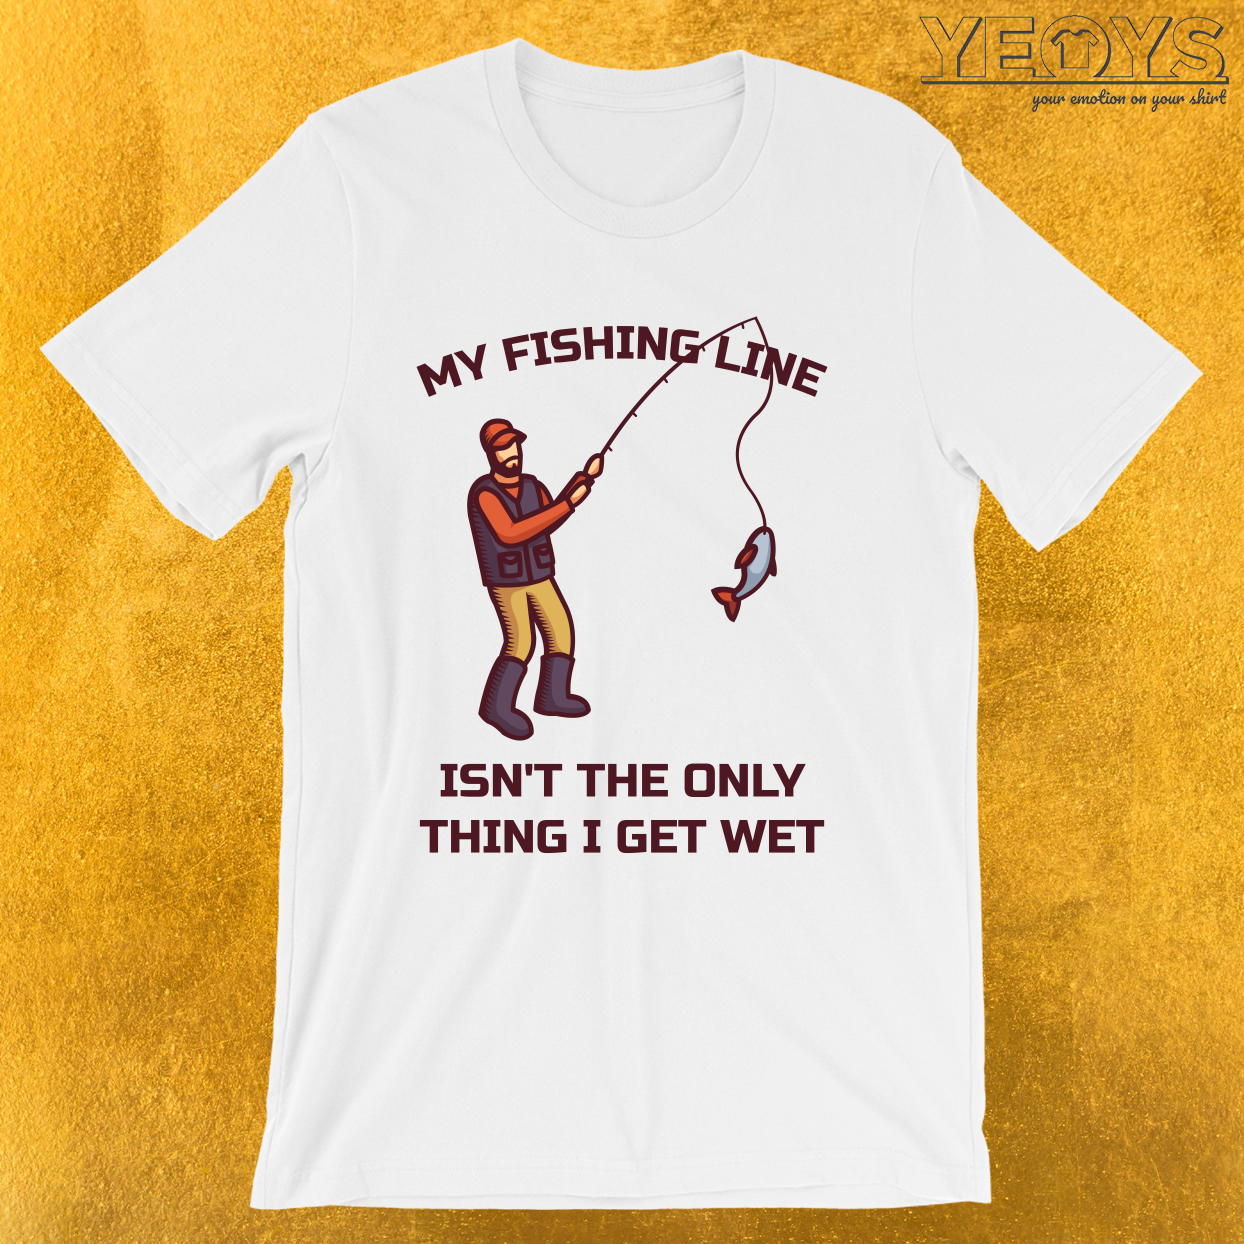 My Fishing Line Isn’t The Only Thing I Get Wet – River & Lake Fishing Tee